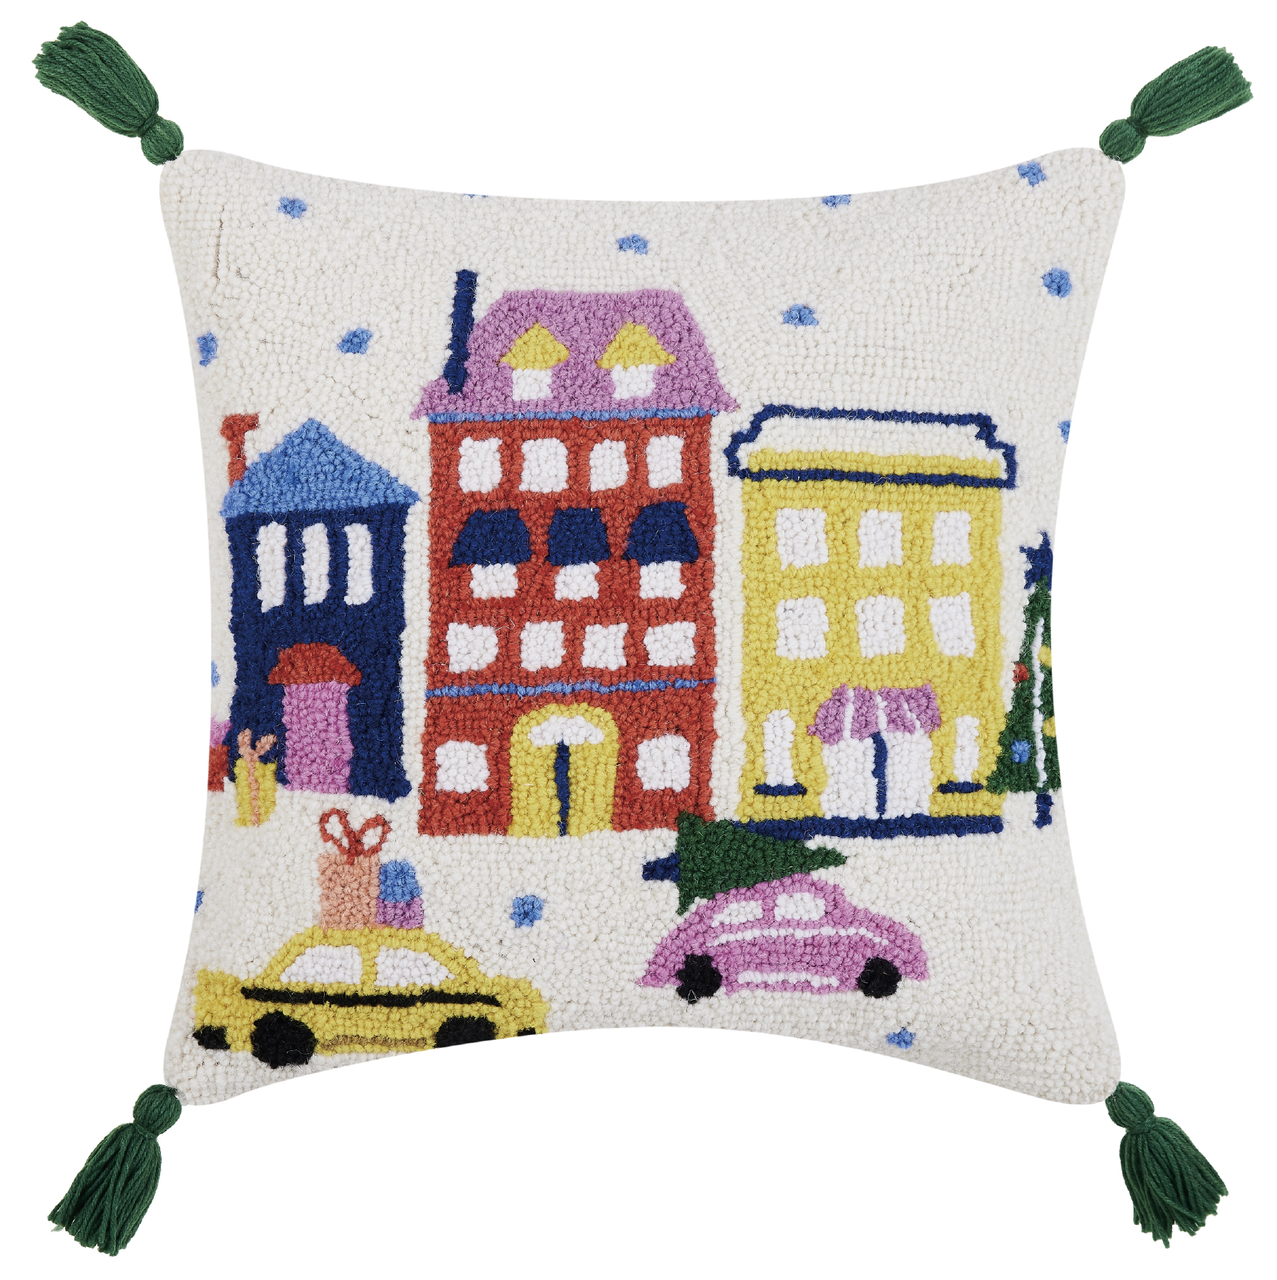 Xmas in City Hook Pillow with Tassels